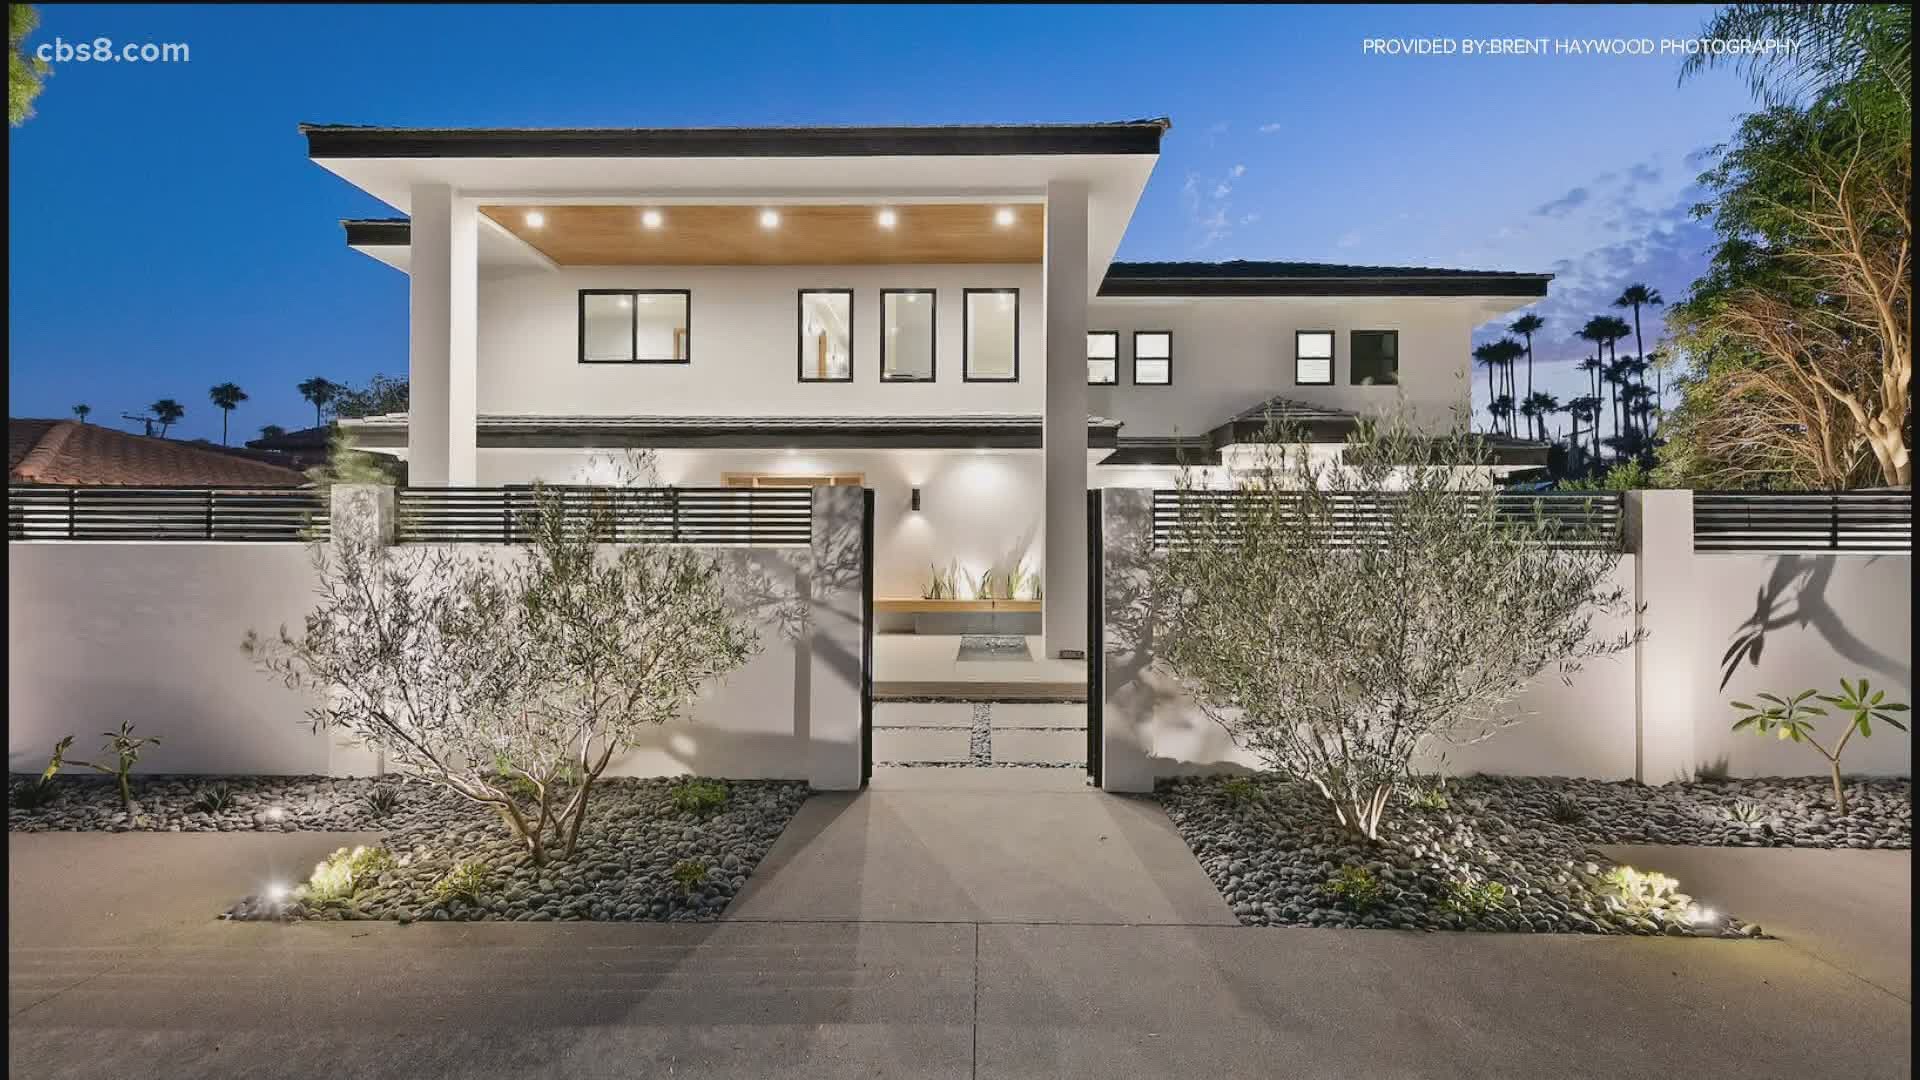 You'd expect a home in La Jolla with an ocean view to sell for $5 million, but what makes a property in Bird Rock different is that you pay for it in bitcoin